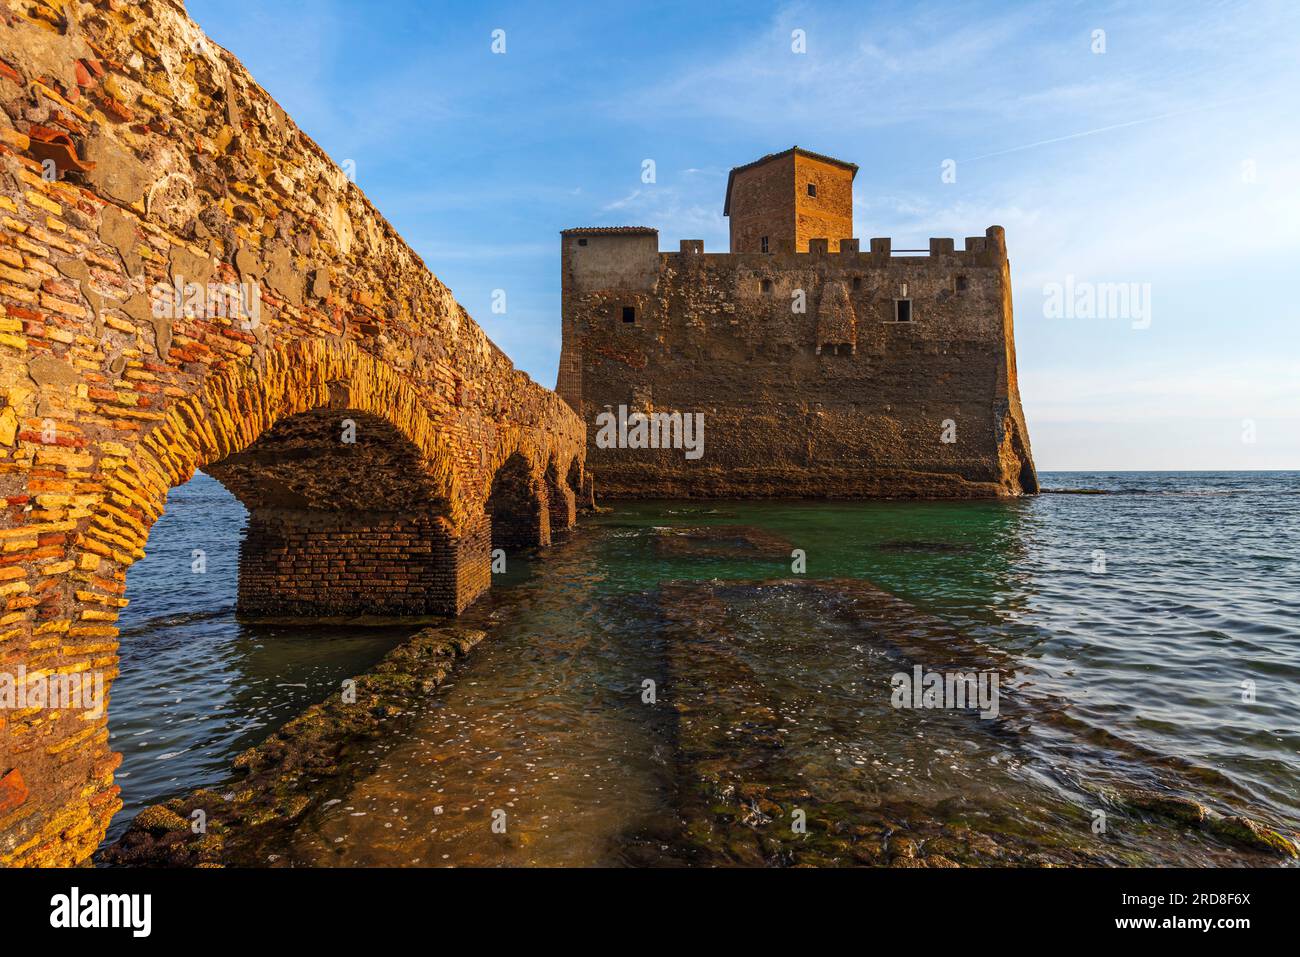 View from below of the arches of the bridge that link the Torre Astura castle with mainland, at sunset, Tyrrhenian Sea, Rome province, Latium (Lazio) Stock Photo